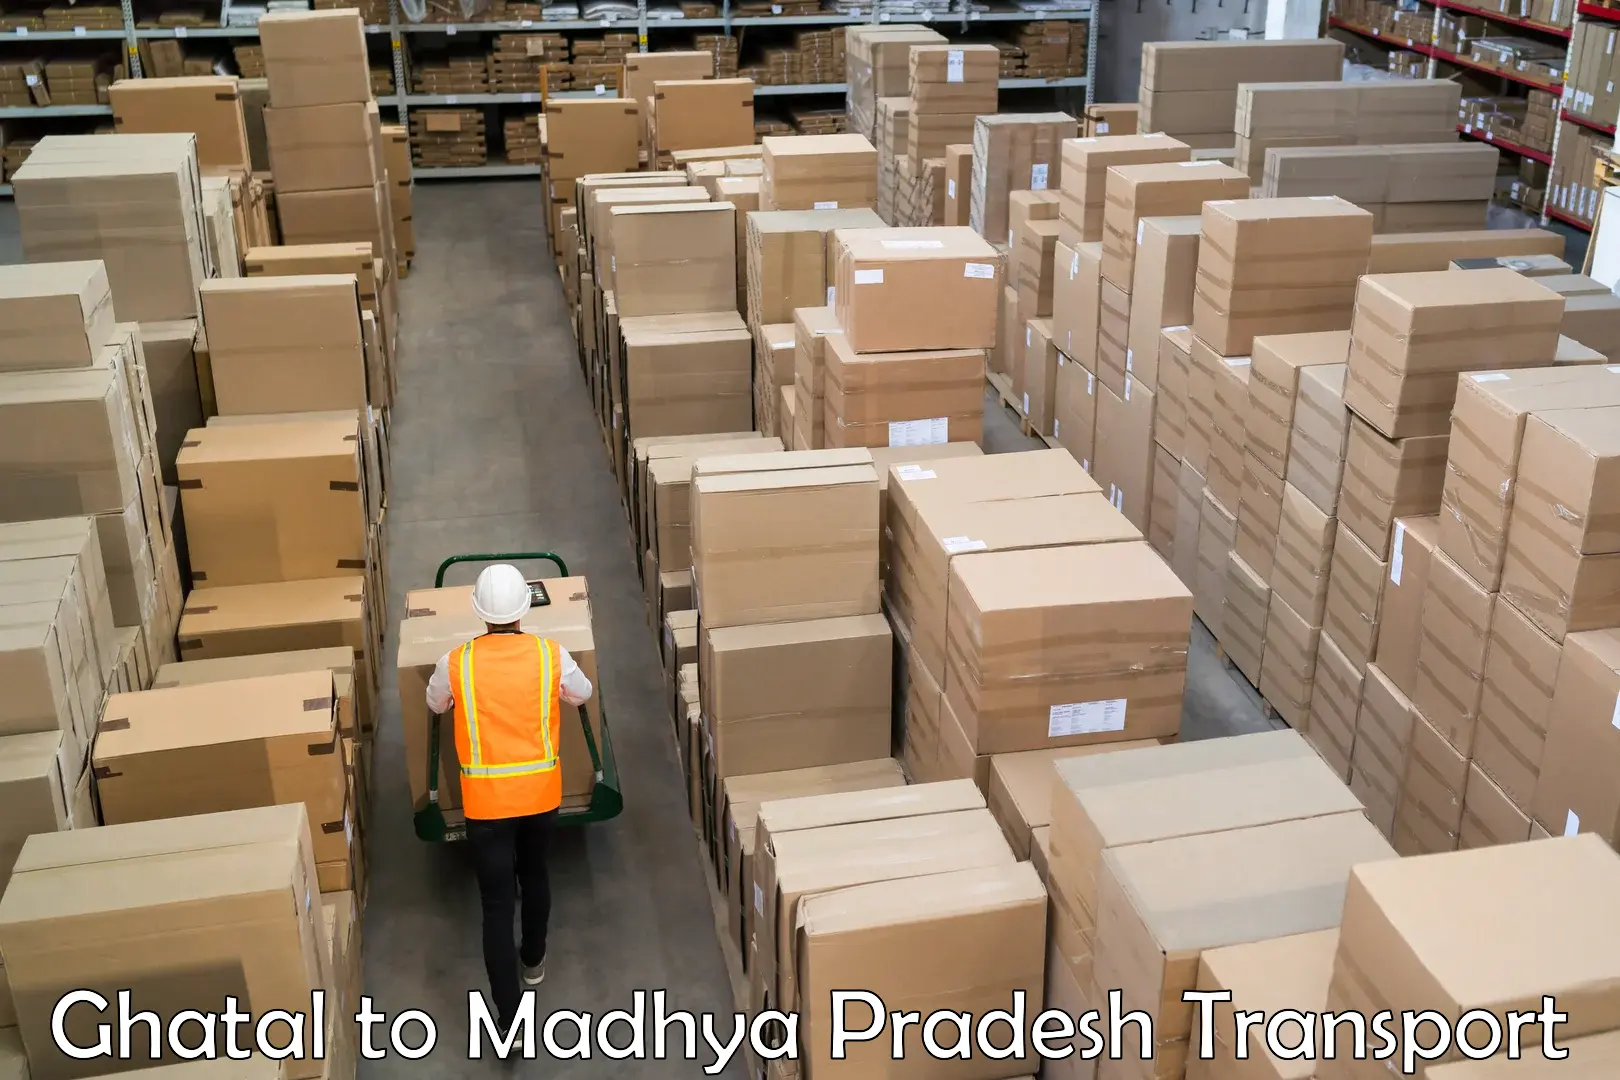 Truck transport companies in India Ghatal to IIT Indore